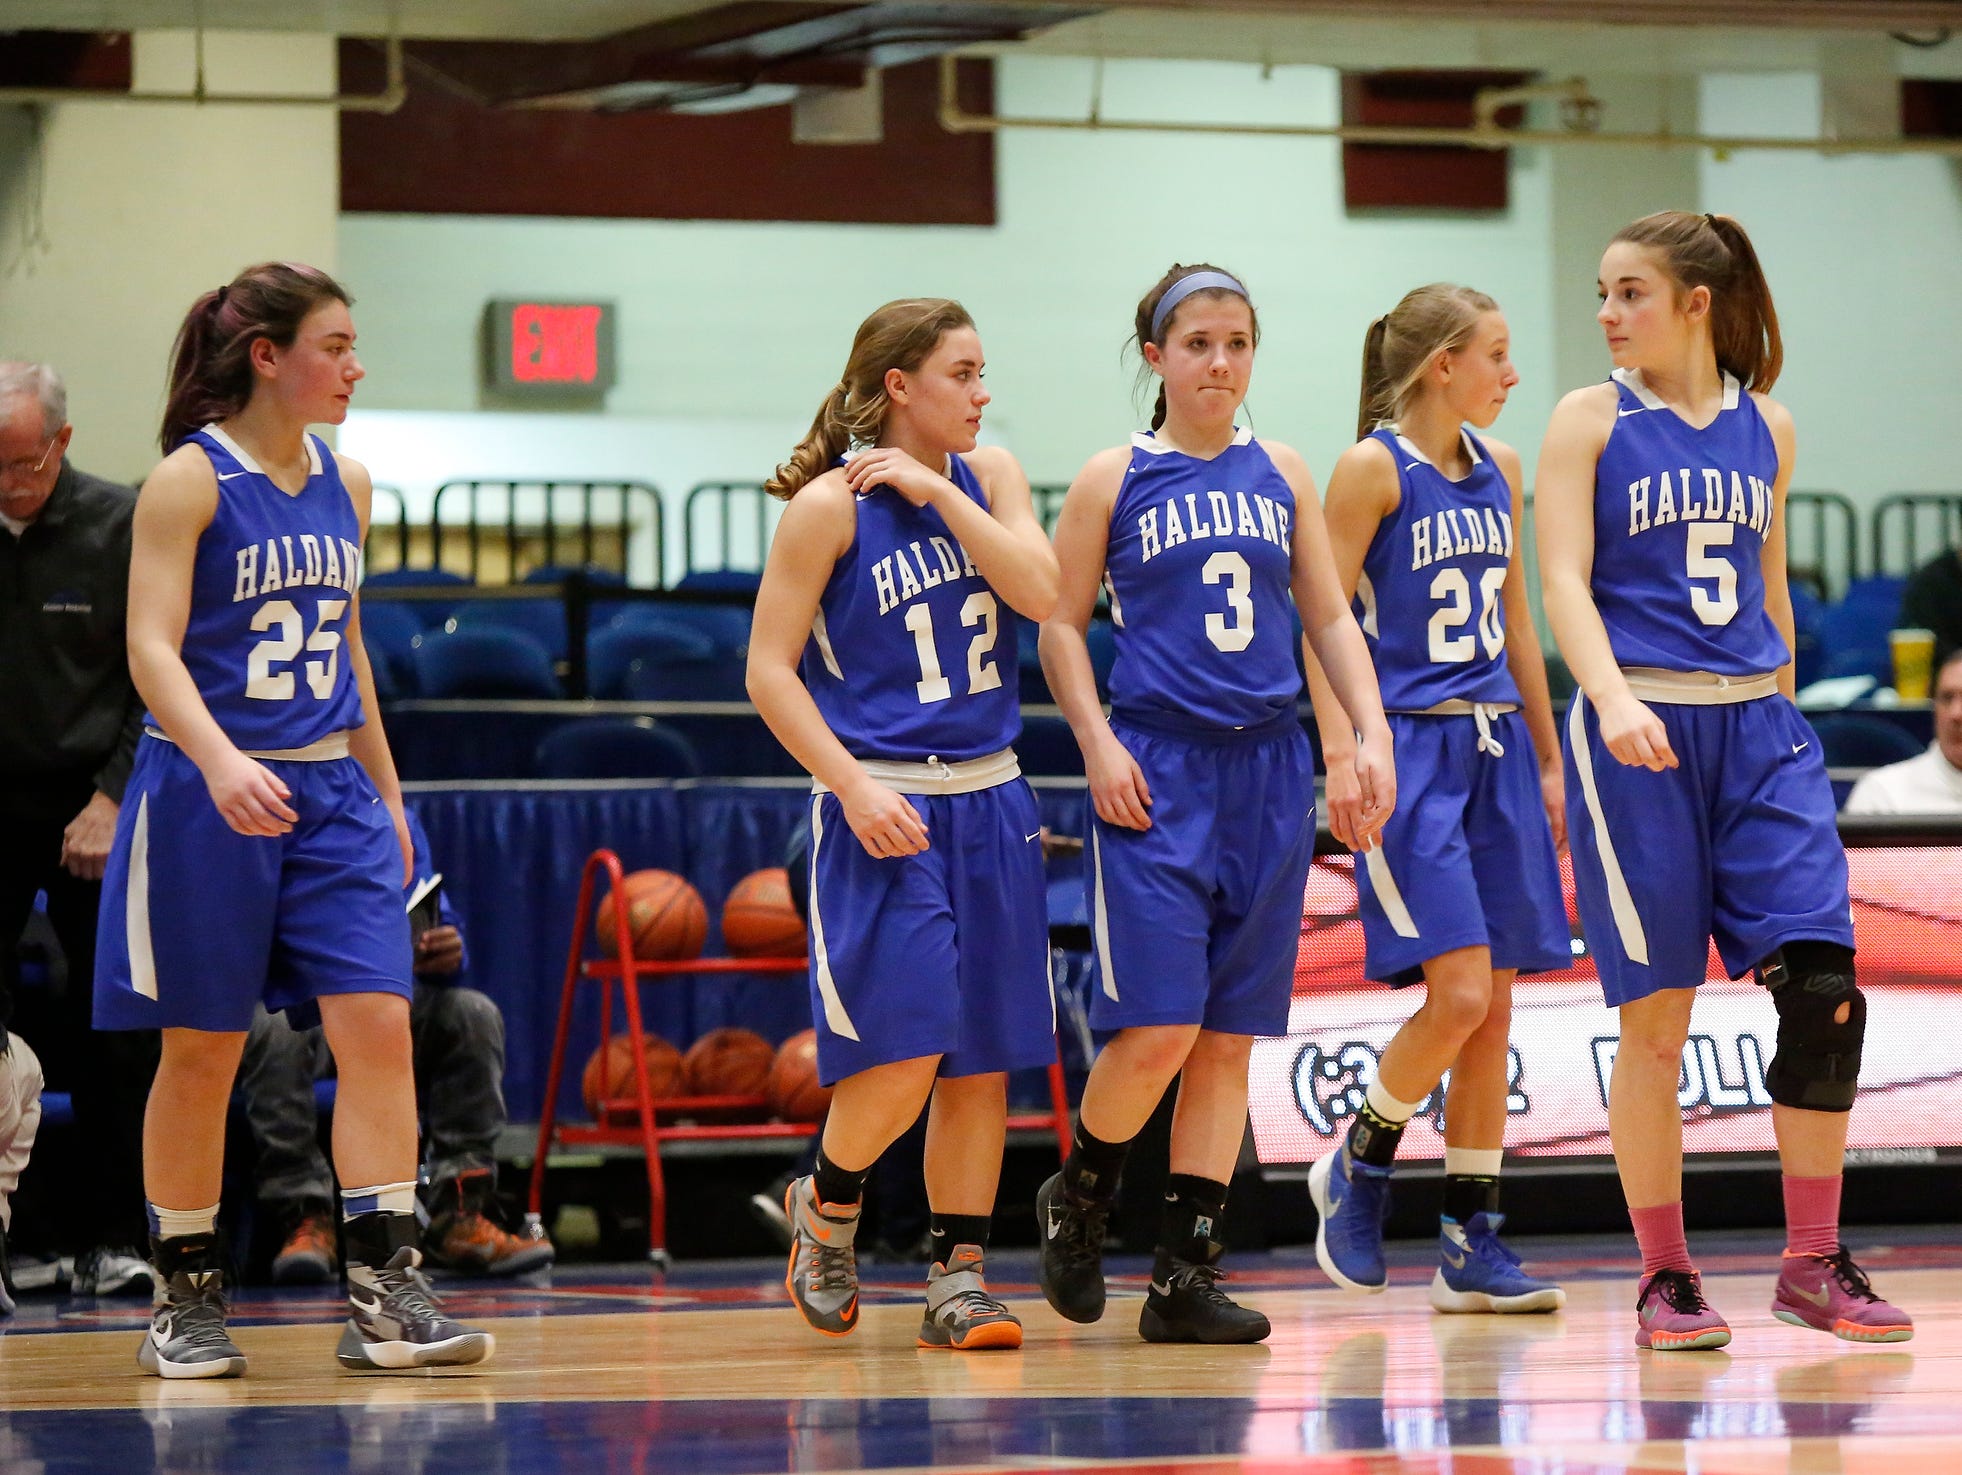 Haldane defeats Hamilton 48-34 in the class C semi-final basketball game at the Westchester County Center in White Plains on Saturday, February 27, 2016.